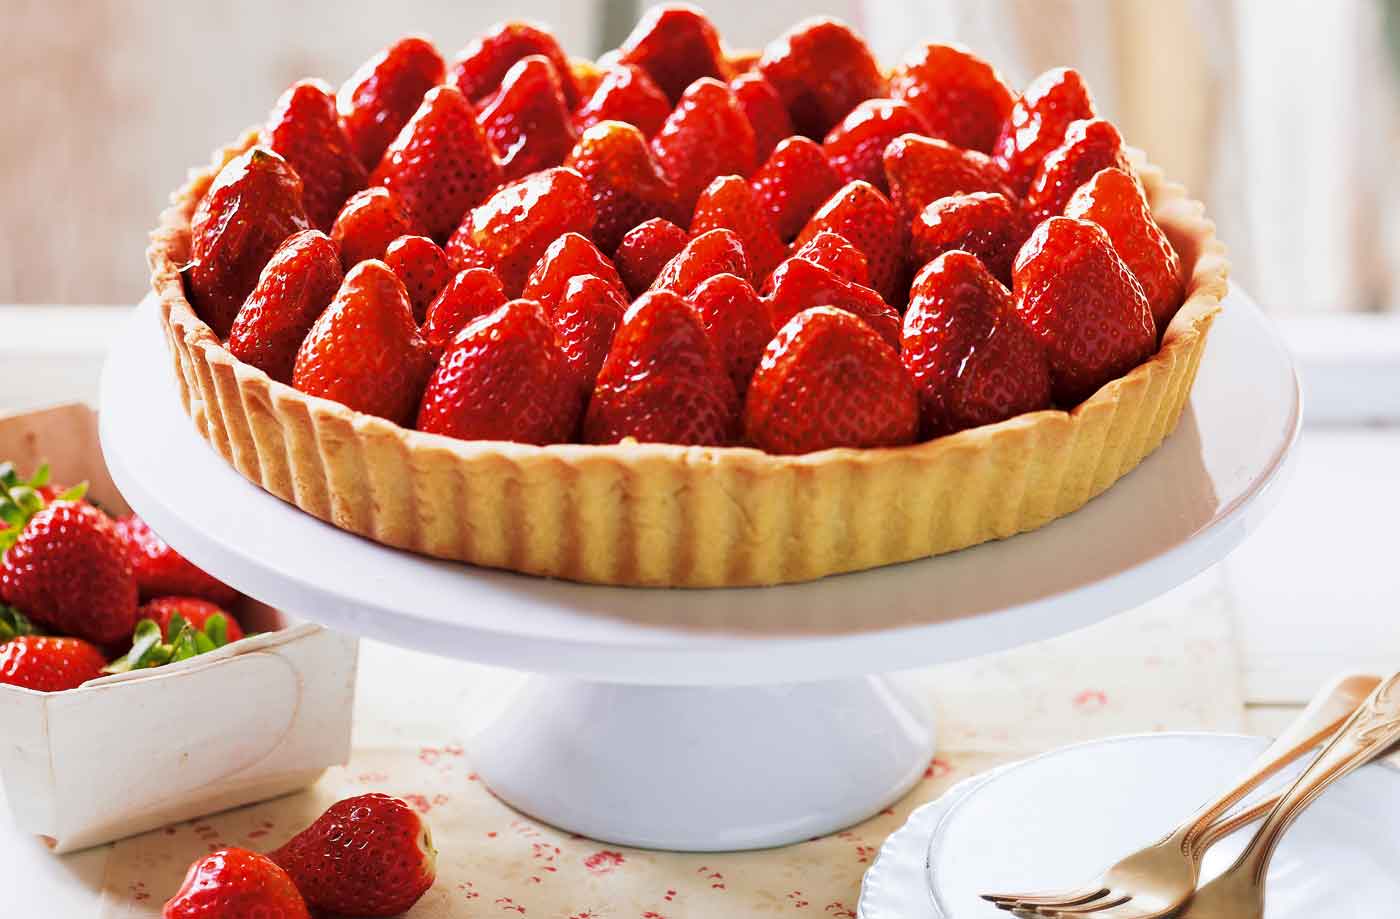 Does Your Real Age Match Your Taste Buds’ Age? Pick a Food for Each of These 16 Ingredients to Find Out Strawberry tart